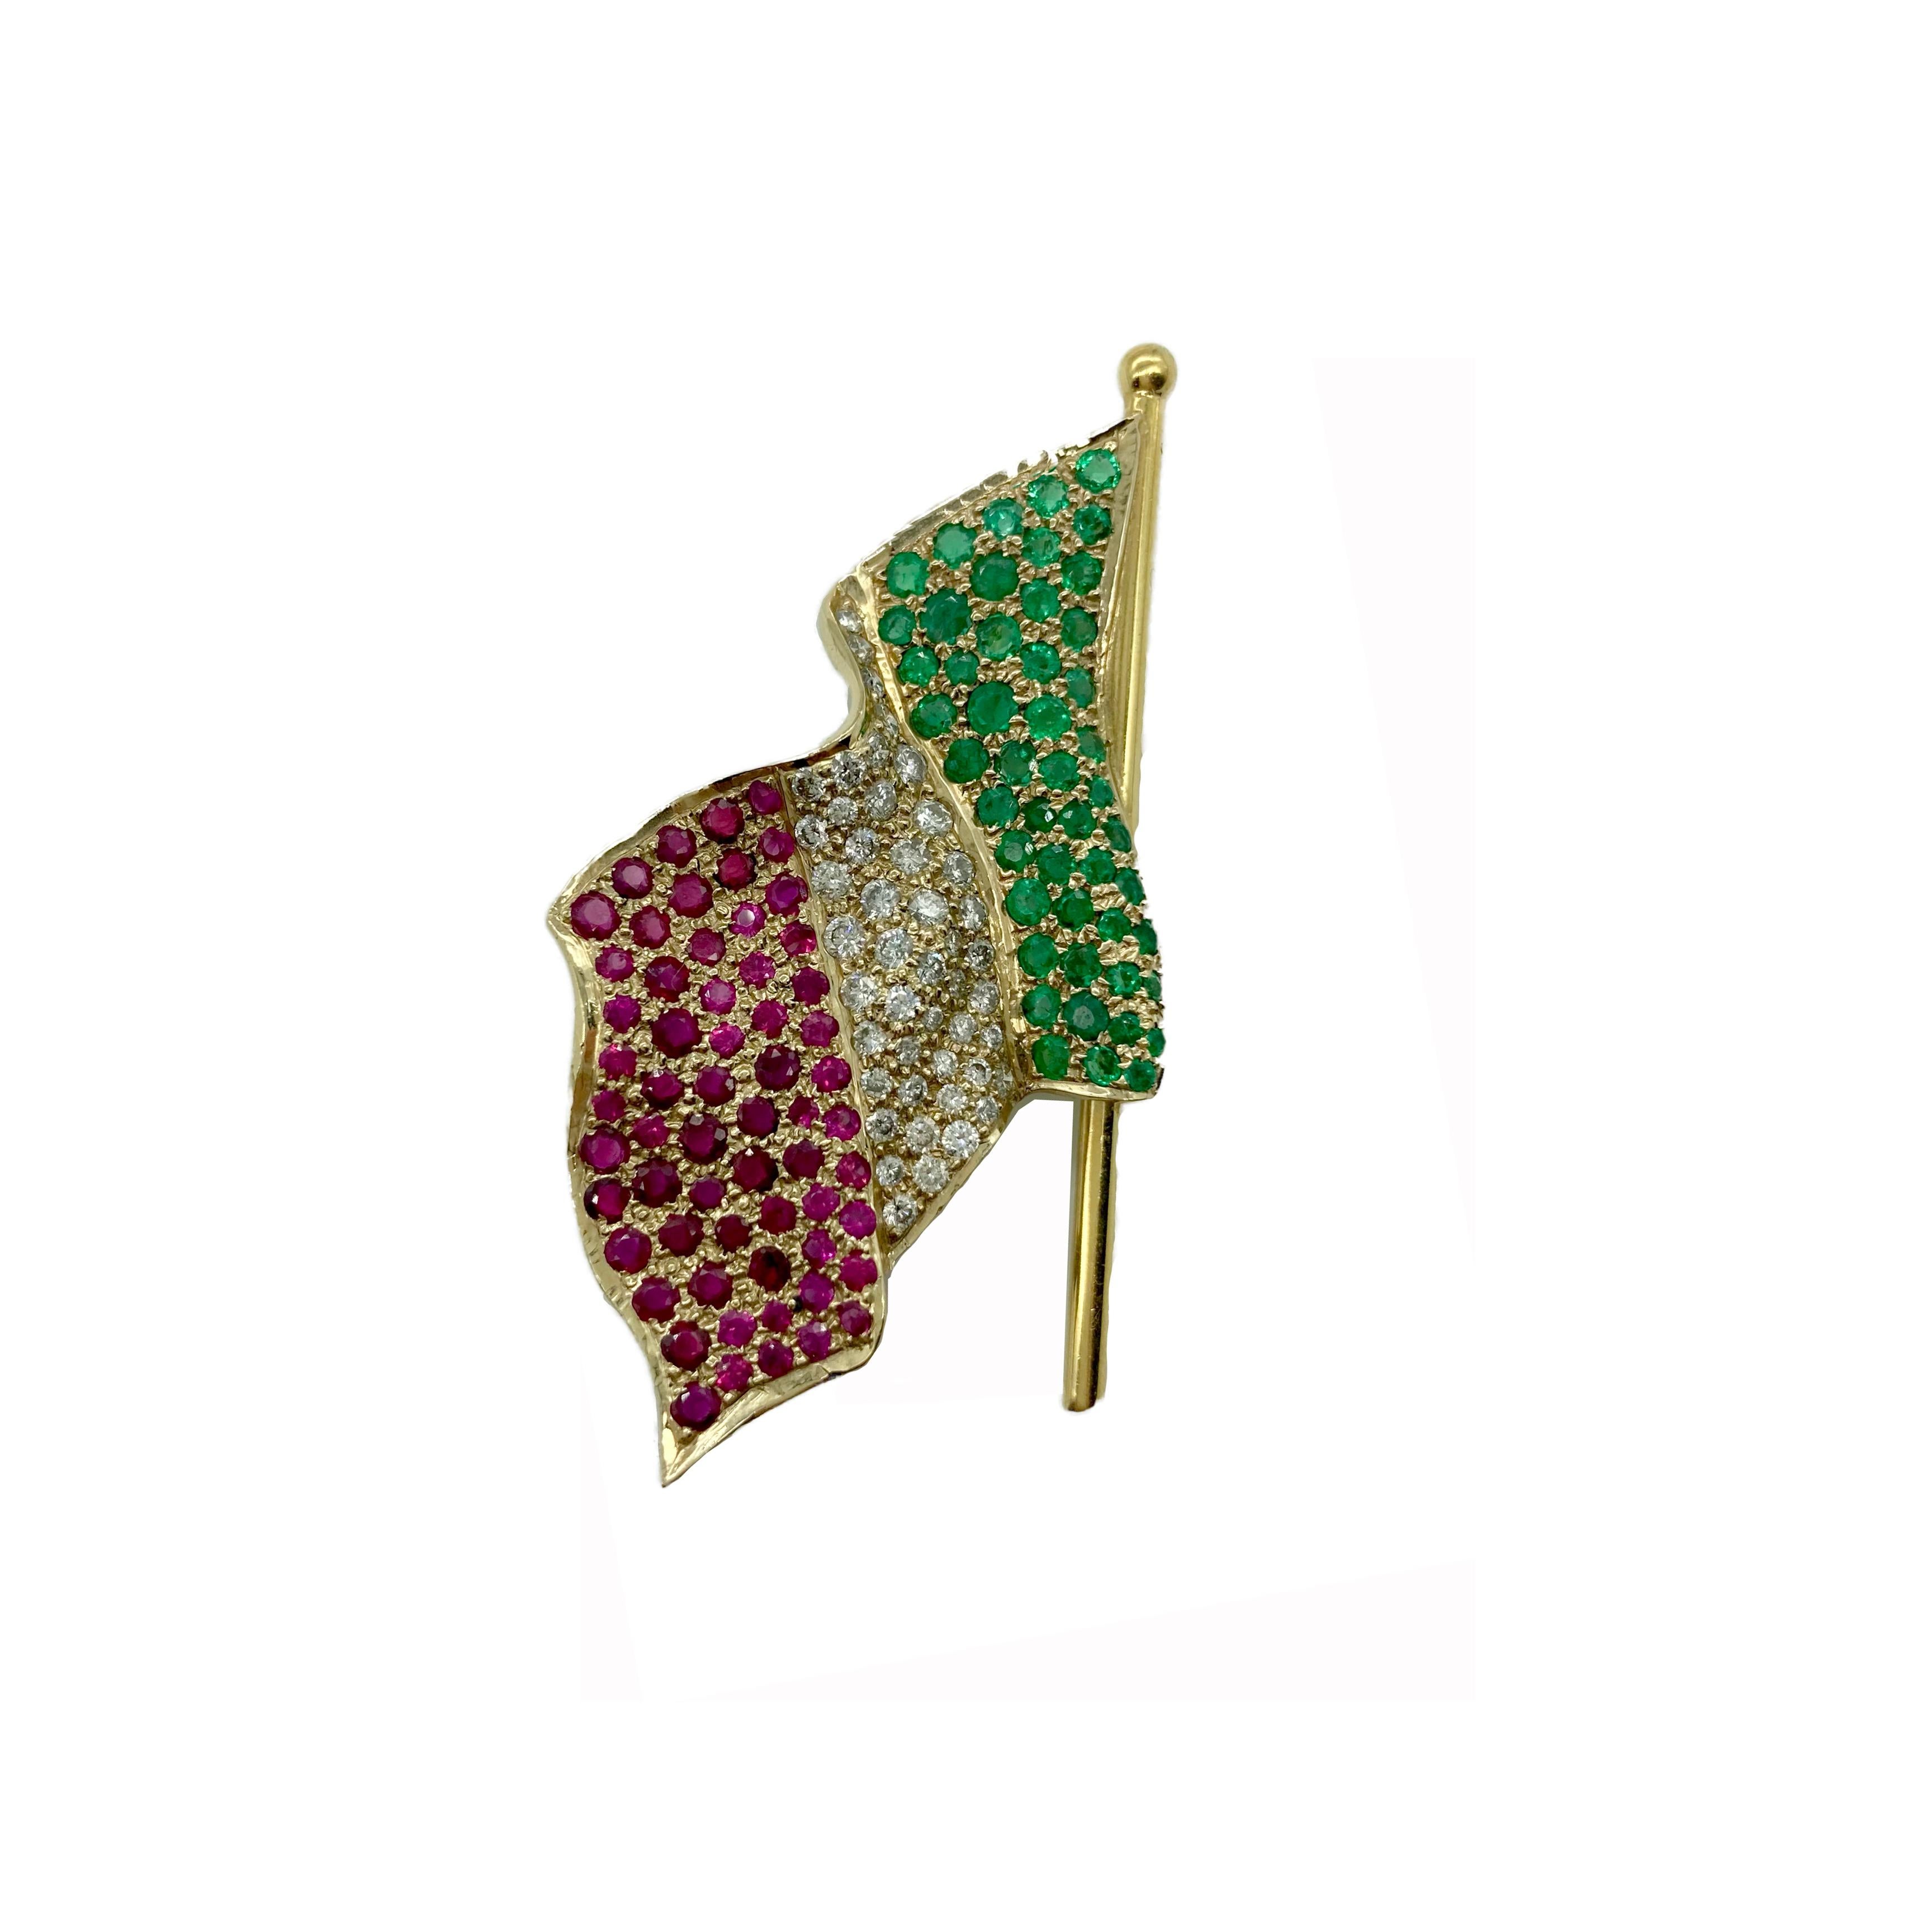 A chic Italian flag brooch encrusted in rubies, emeralds, and diamonds. Made in Italy.